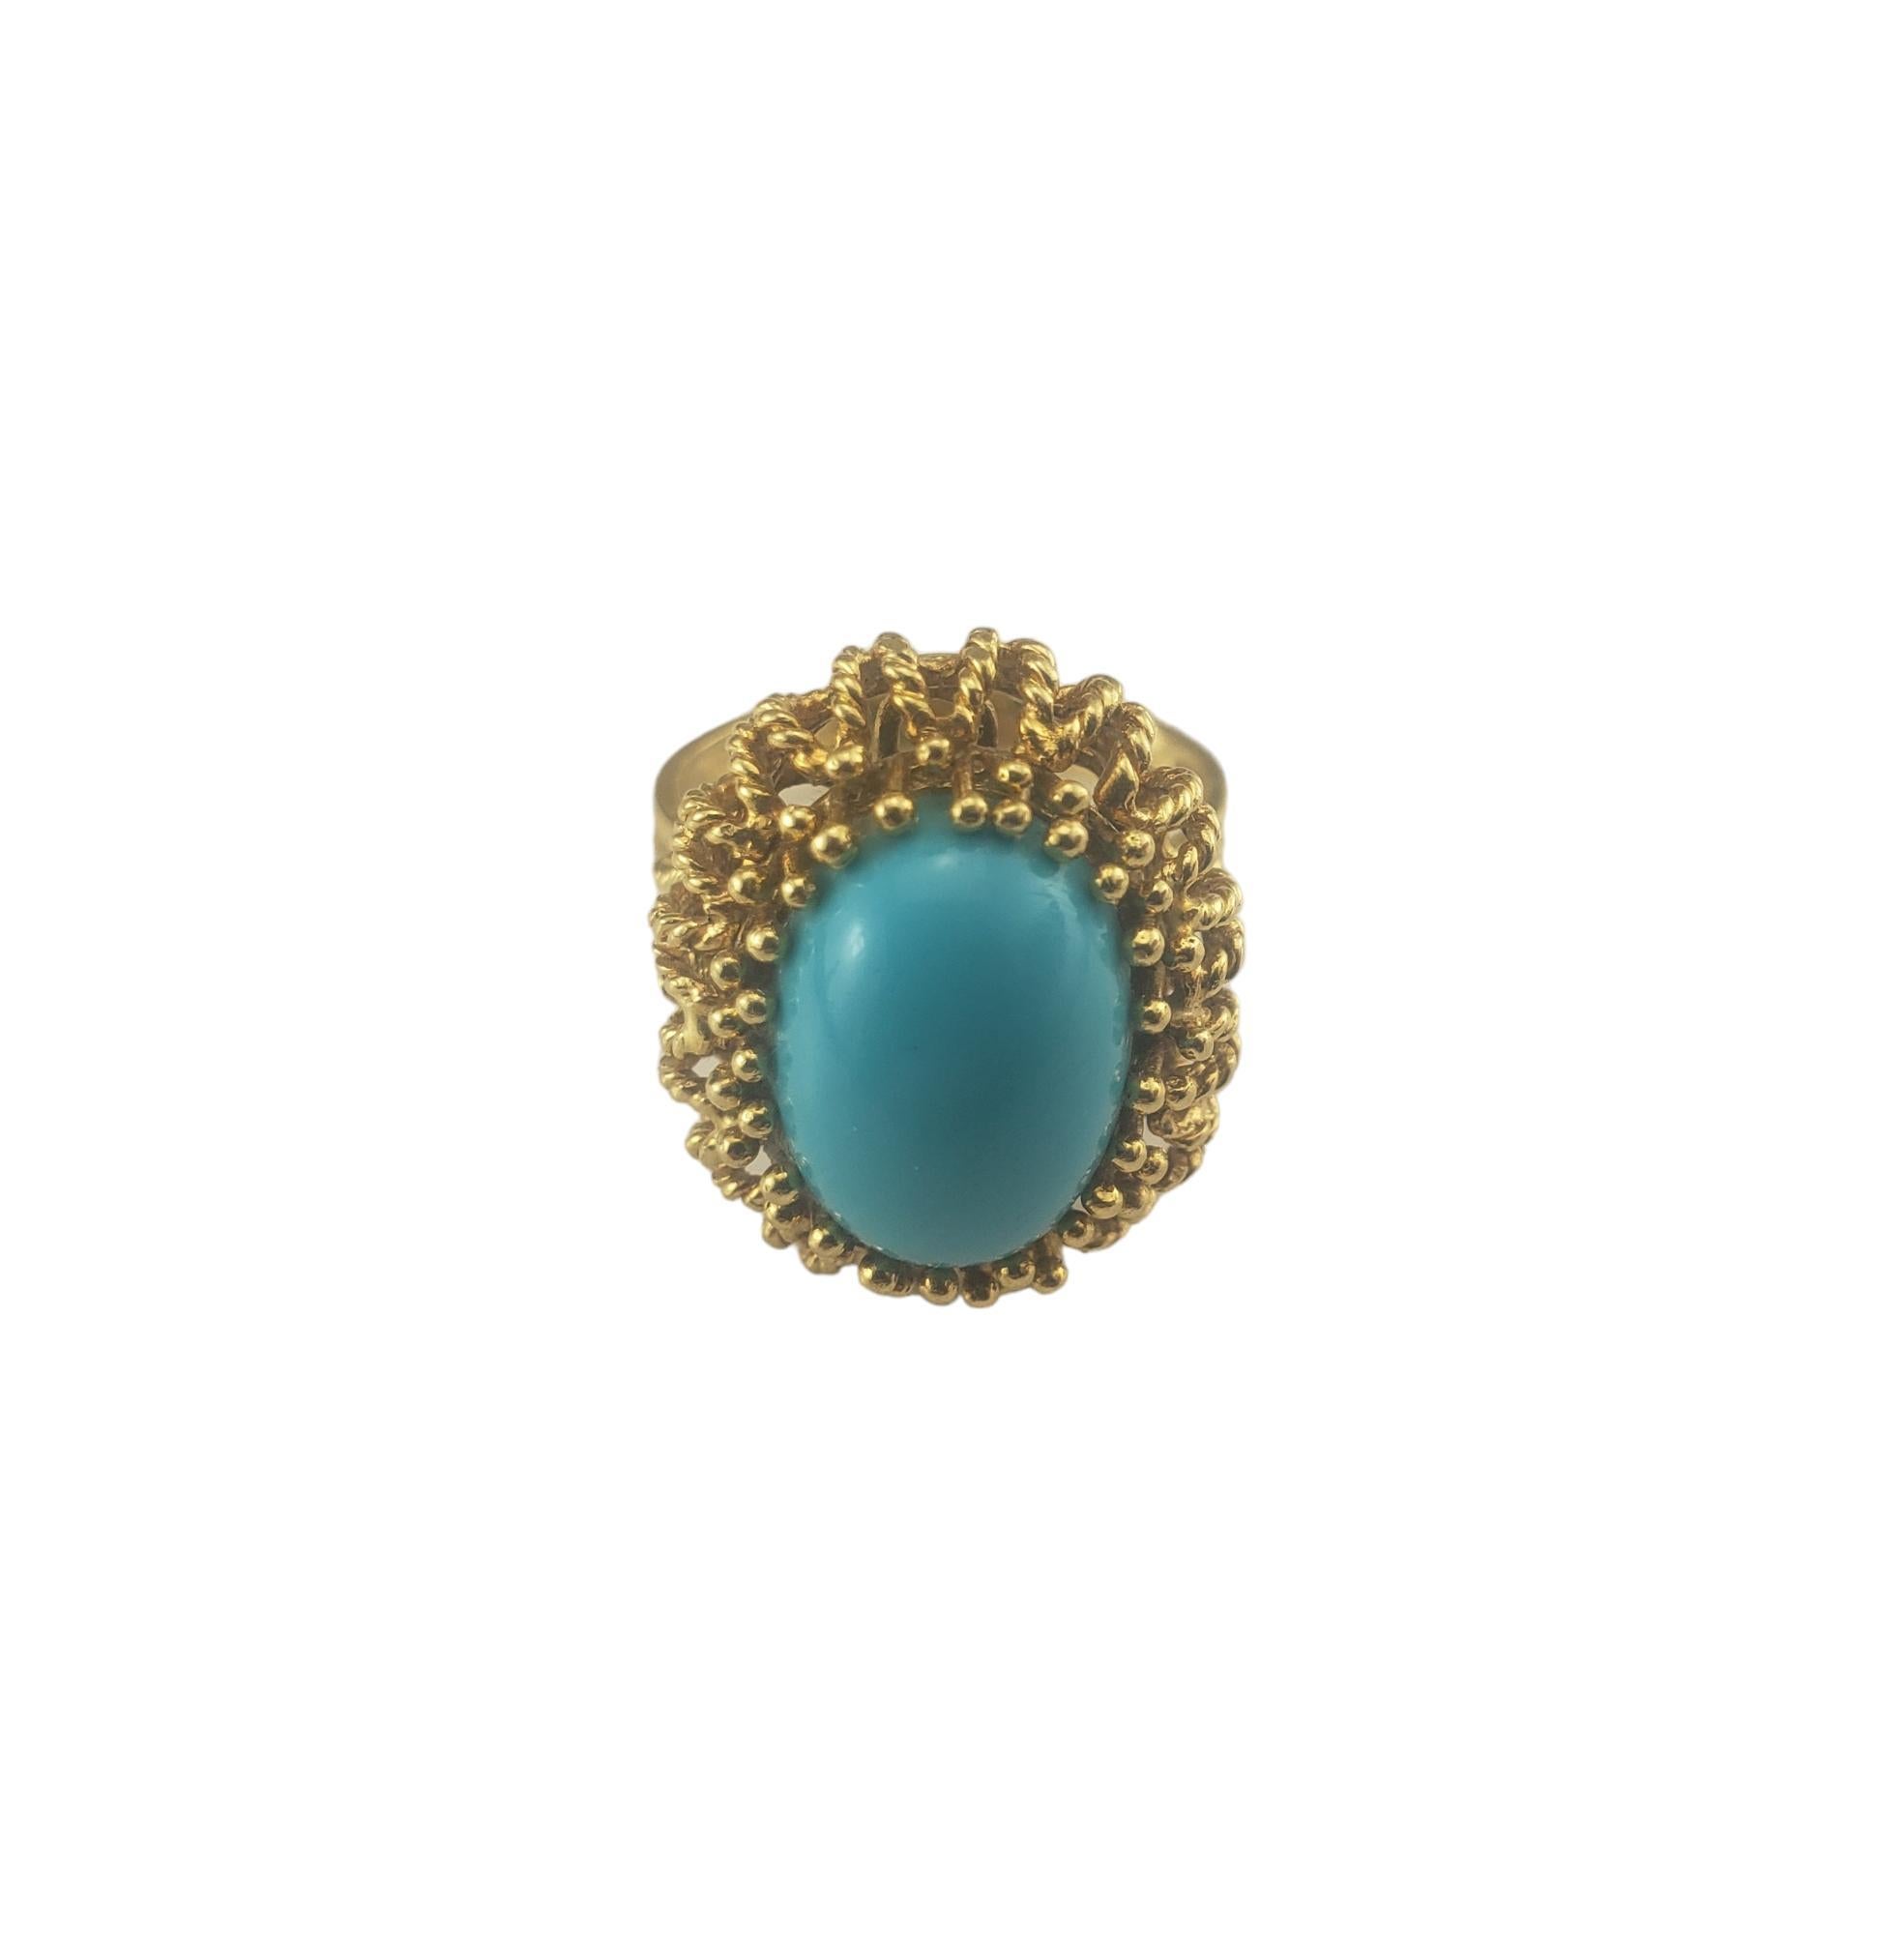 Vintage 18 Karat Yellow Gold Turquoise Ring Size 6.5

This lovely ring features one oval cabochon turquoise stone (14 mm x 10 mm) set in beautifully detailed 18K yellow gold.  

Width: 21 mm.  

Shank: 3 mm.

Ring Size: 6.5

Stamped: 18K

Weight: